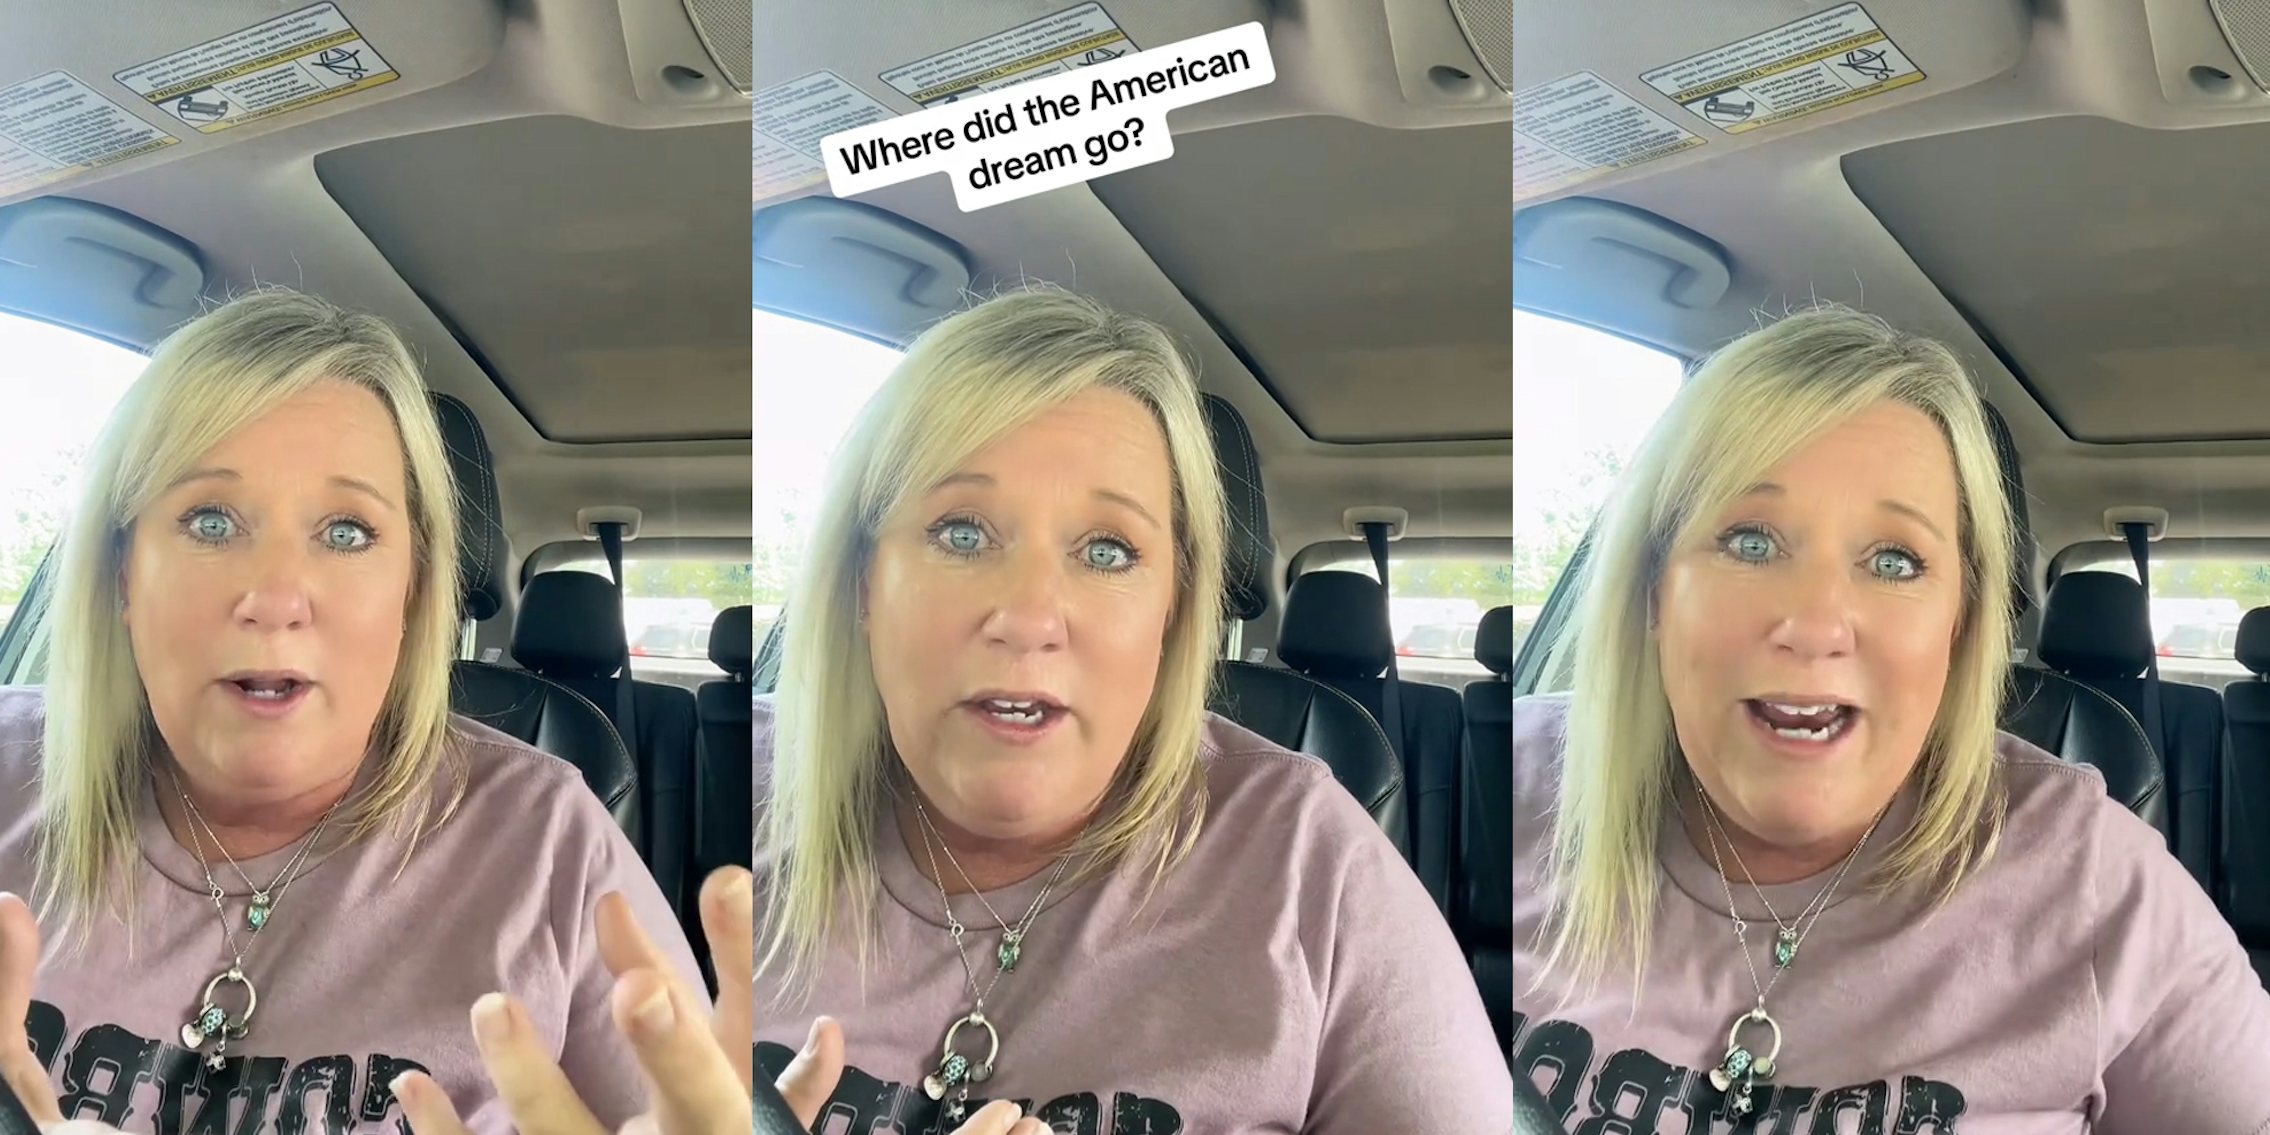 woman speaking in car (l) woman speaking in car with caption 'Where did the American dream go?' (c) woman speaking in car (r)